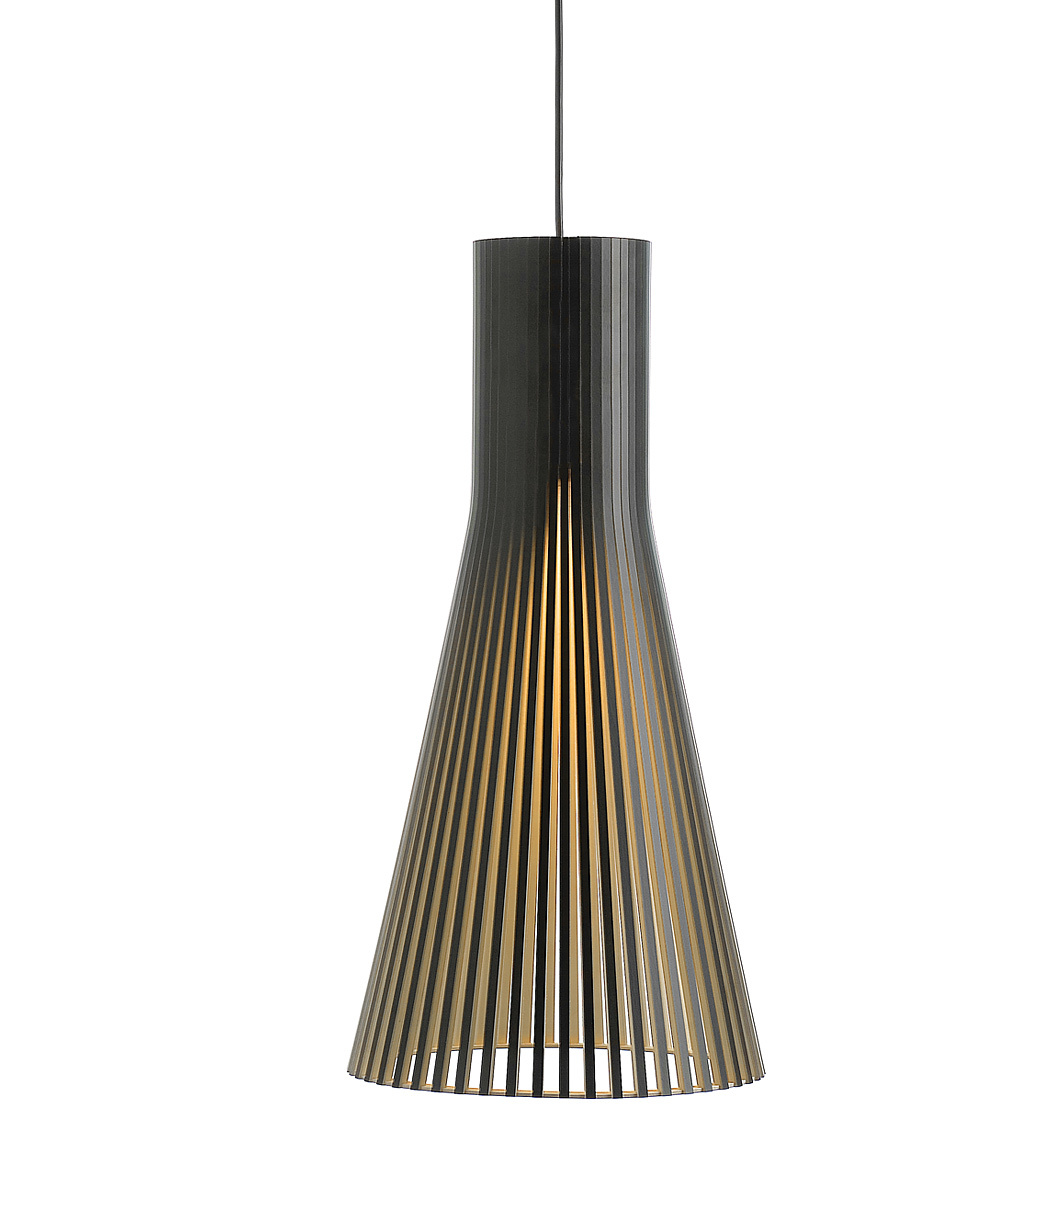 Secto 4200 pendant lamp is available in black laminated